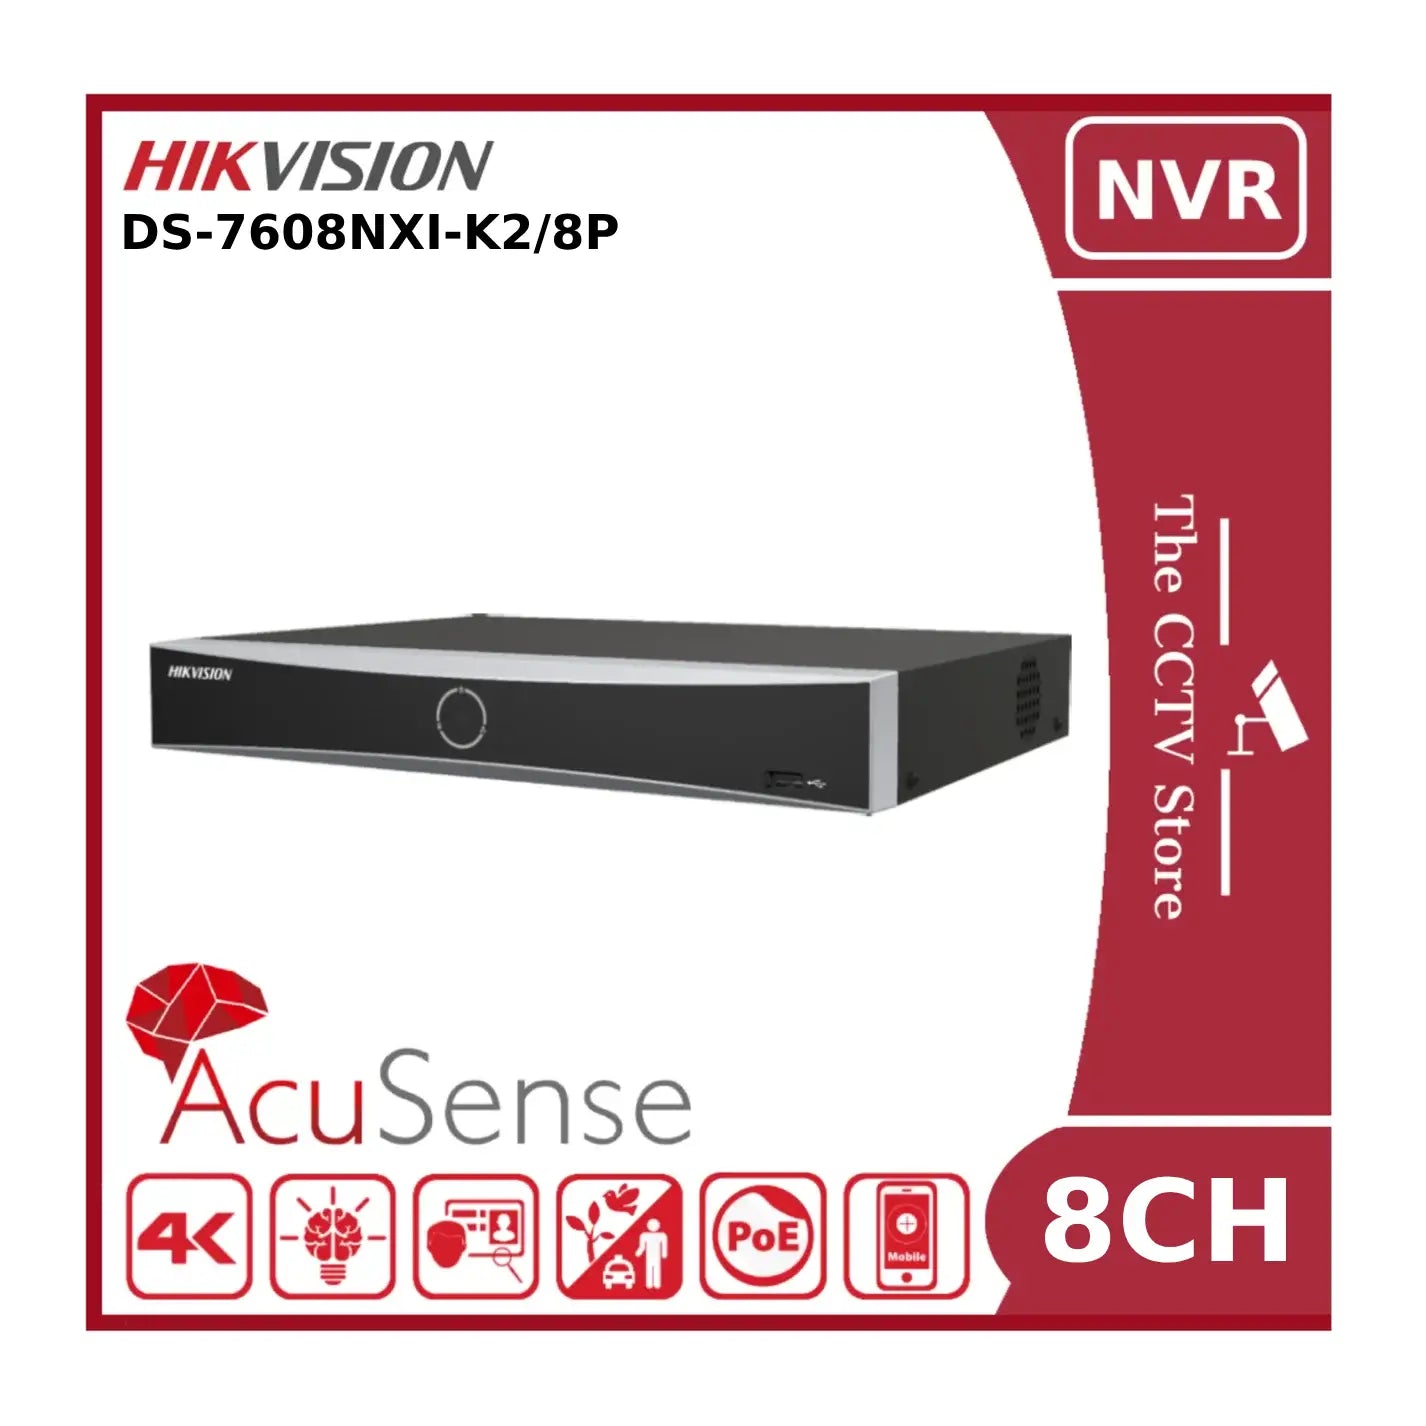 Hikvision DS-7608NXI-K2/8P 4K AcuSense PoE 8 Channel NVR With 2HDD Bays